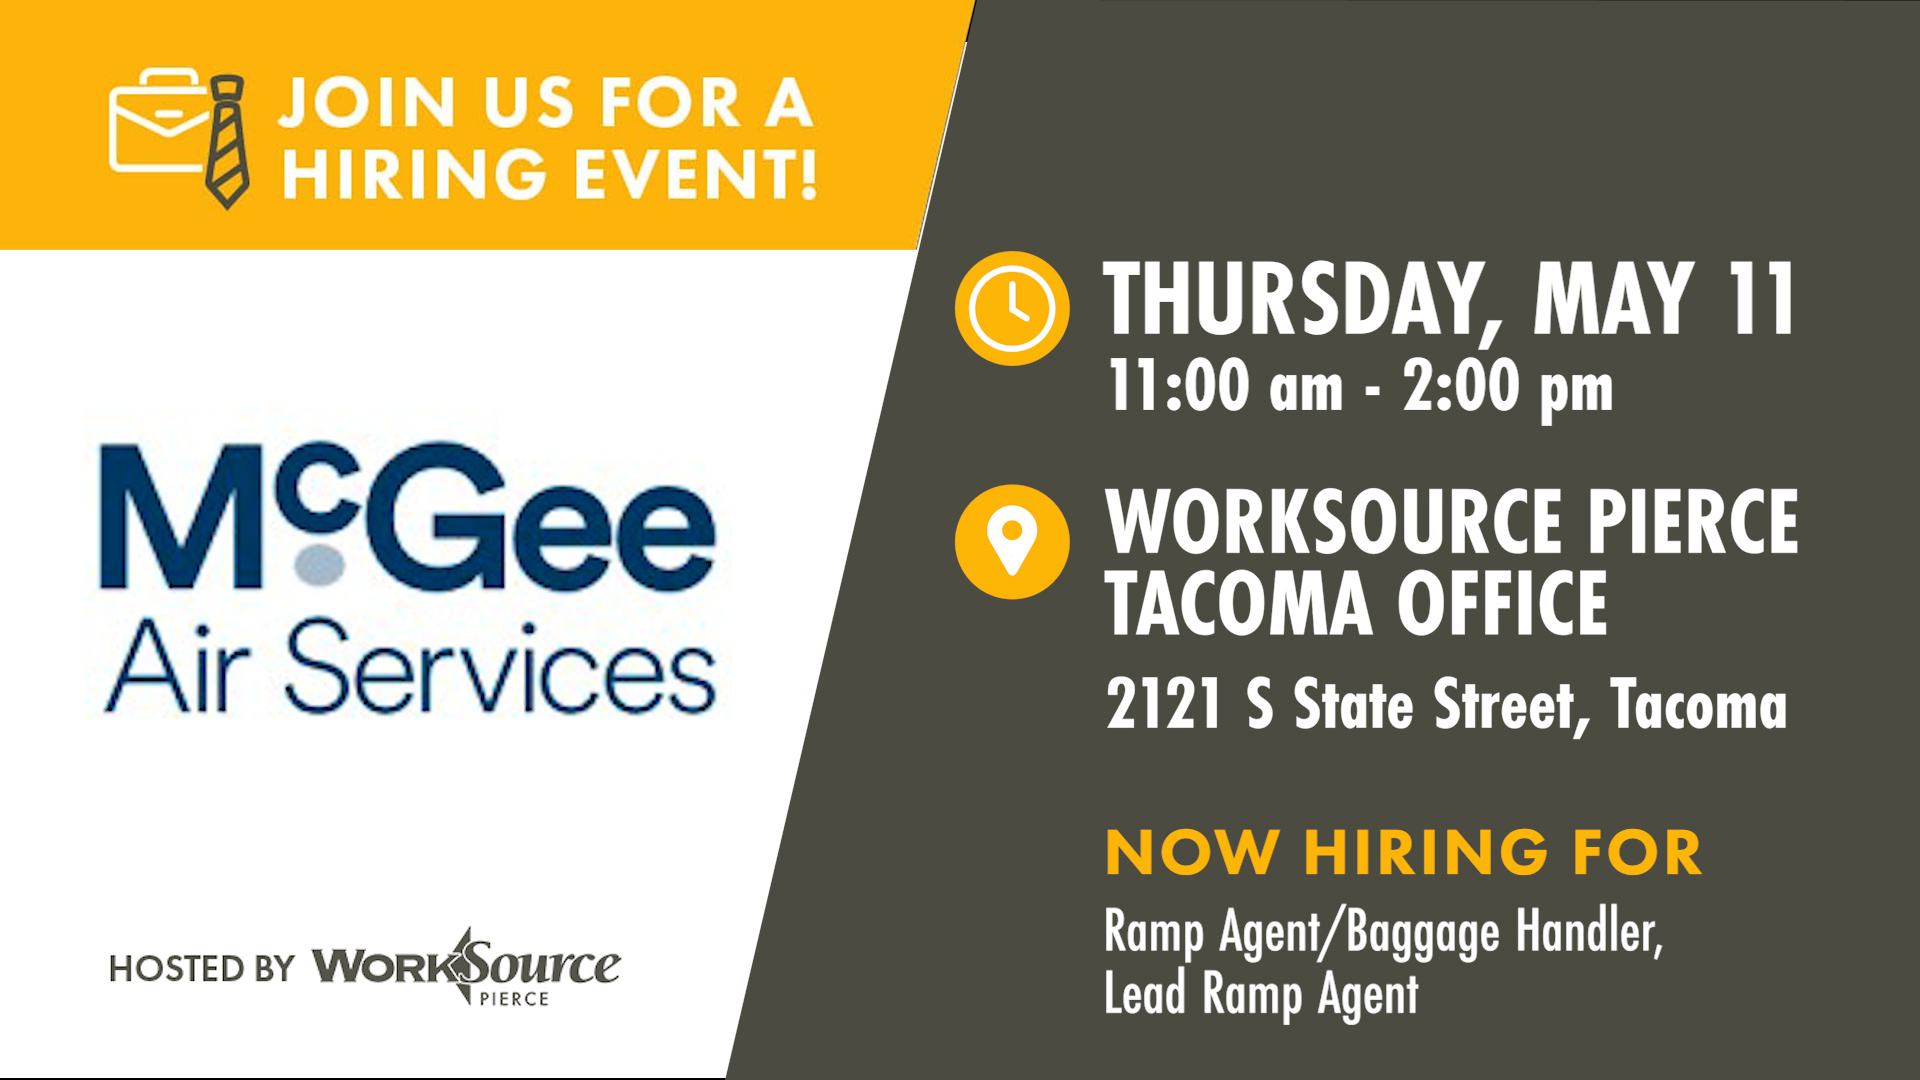 McGee Air Services Hiring Event - May 11 1